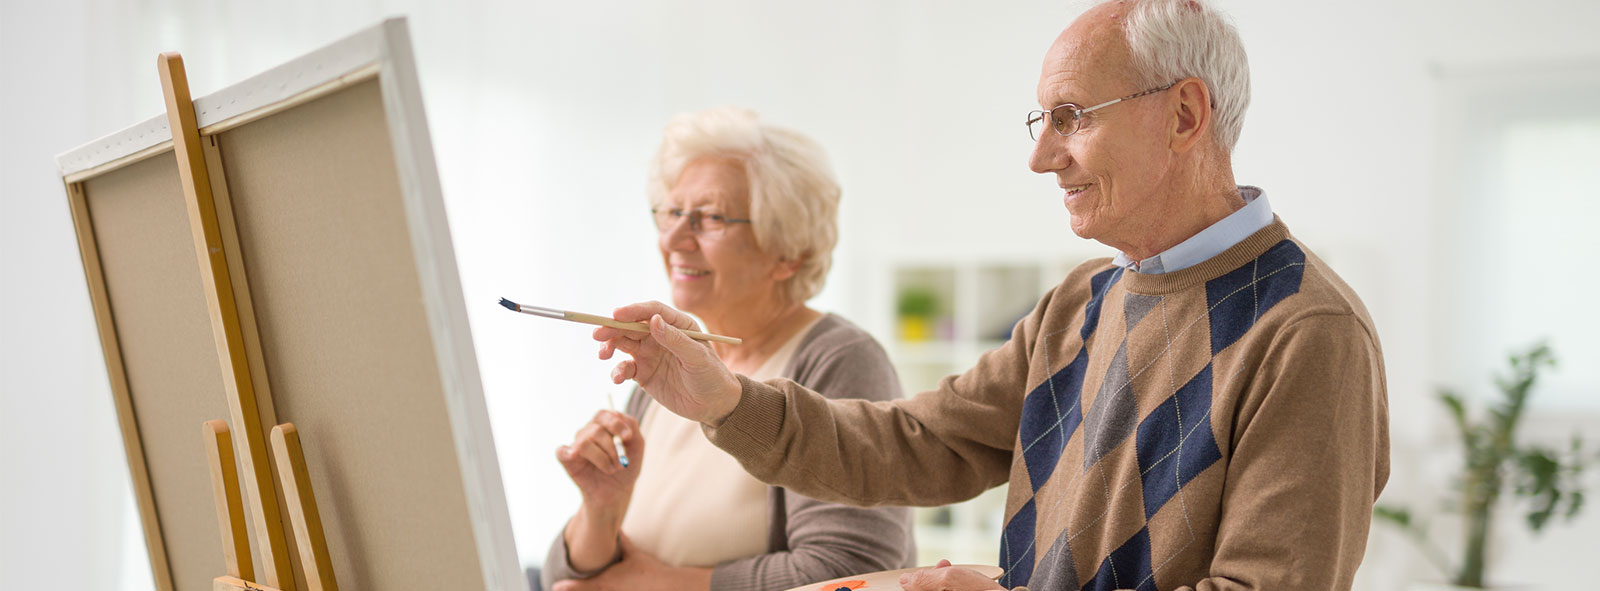 Older man and woman painting something on a canvas with paintbrushes at memory care facility